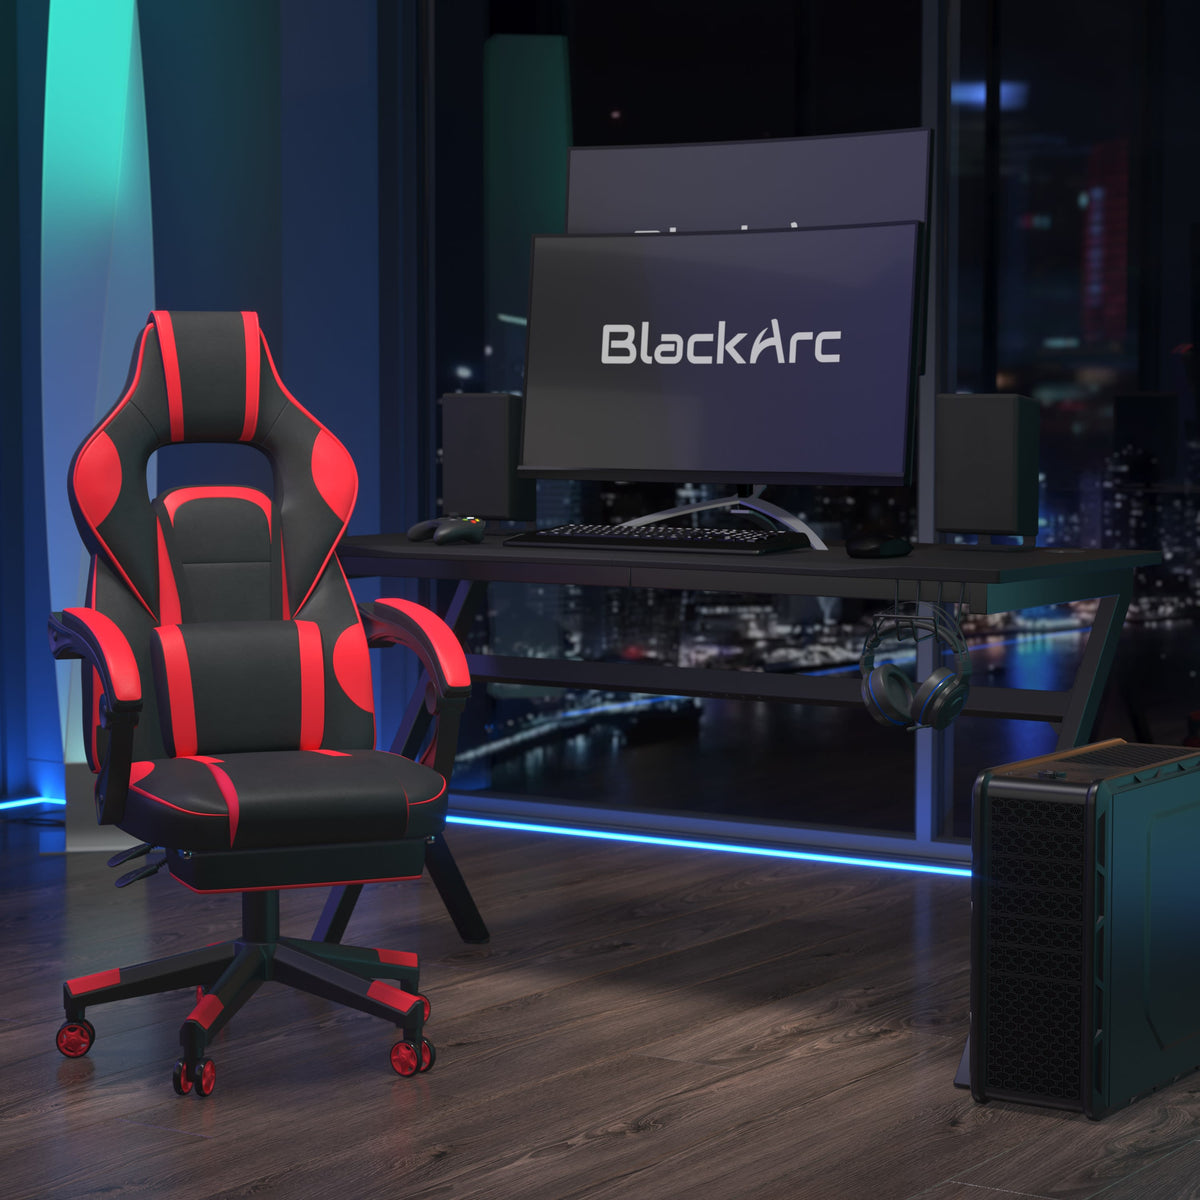 Black Gaming Desk and Chair With Massage and Slide-Out Footrest, Headrest Pillow